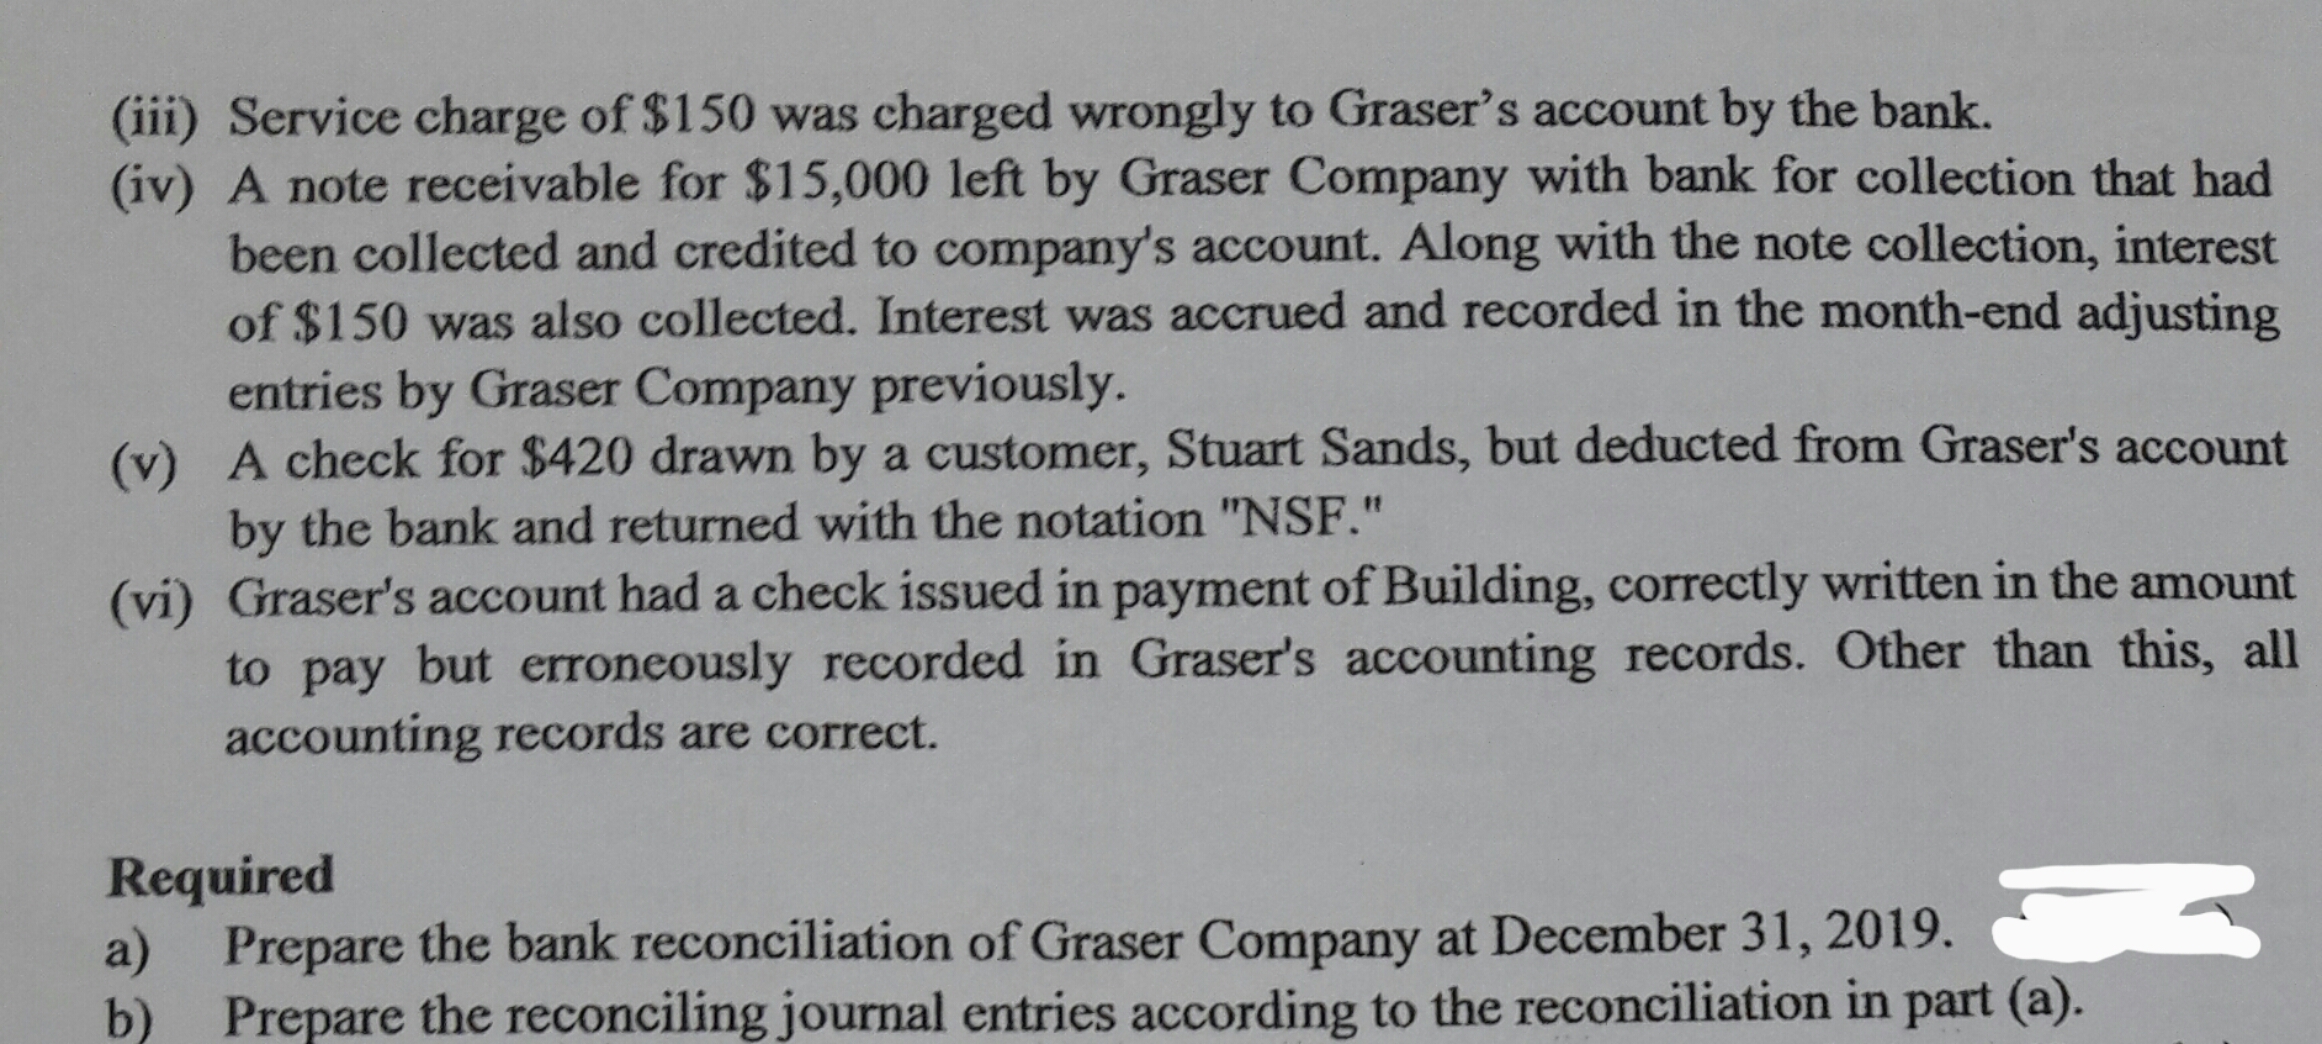 (iii) Service charge of $150 was charged wrongly to Graser's account by the bank.
(iv) A note receivable for $15,000 left by Graser Company with bank for collection that had
been collected and credited to company's account. Along with the note collection, interest
of $150 was also collected. Interest was accrued and recorded in the month-end adjusting
entries by Graser Company previously.
(v) A check for $420 drawn by a customer, Stuart Sands, but deducted from Graser's account
by the bank and returned with the notation "NSF."
(vi) Graser's account had a check issued in payment of Building, correctly written in the amount
to pay but erroneously recorded in Graser's accounting records. Other than this, all
accounting records are correct.
Required
a) Prepare the bank reconciliation of Graser Company at December 31, 2019.
Prepare the reconciling journal entries according to the reconciliation in part (a).
b)
